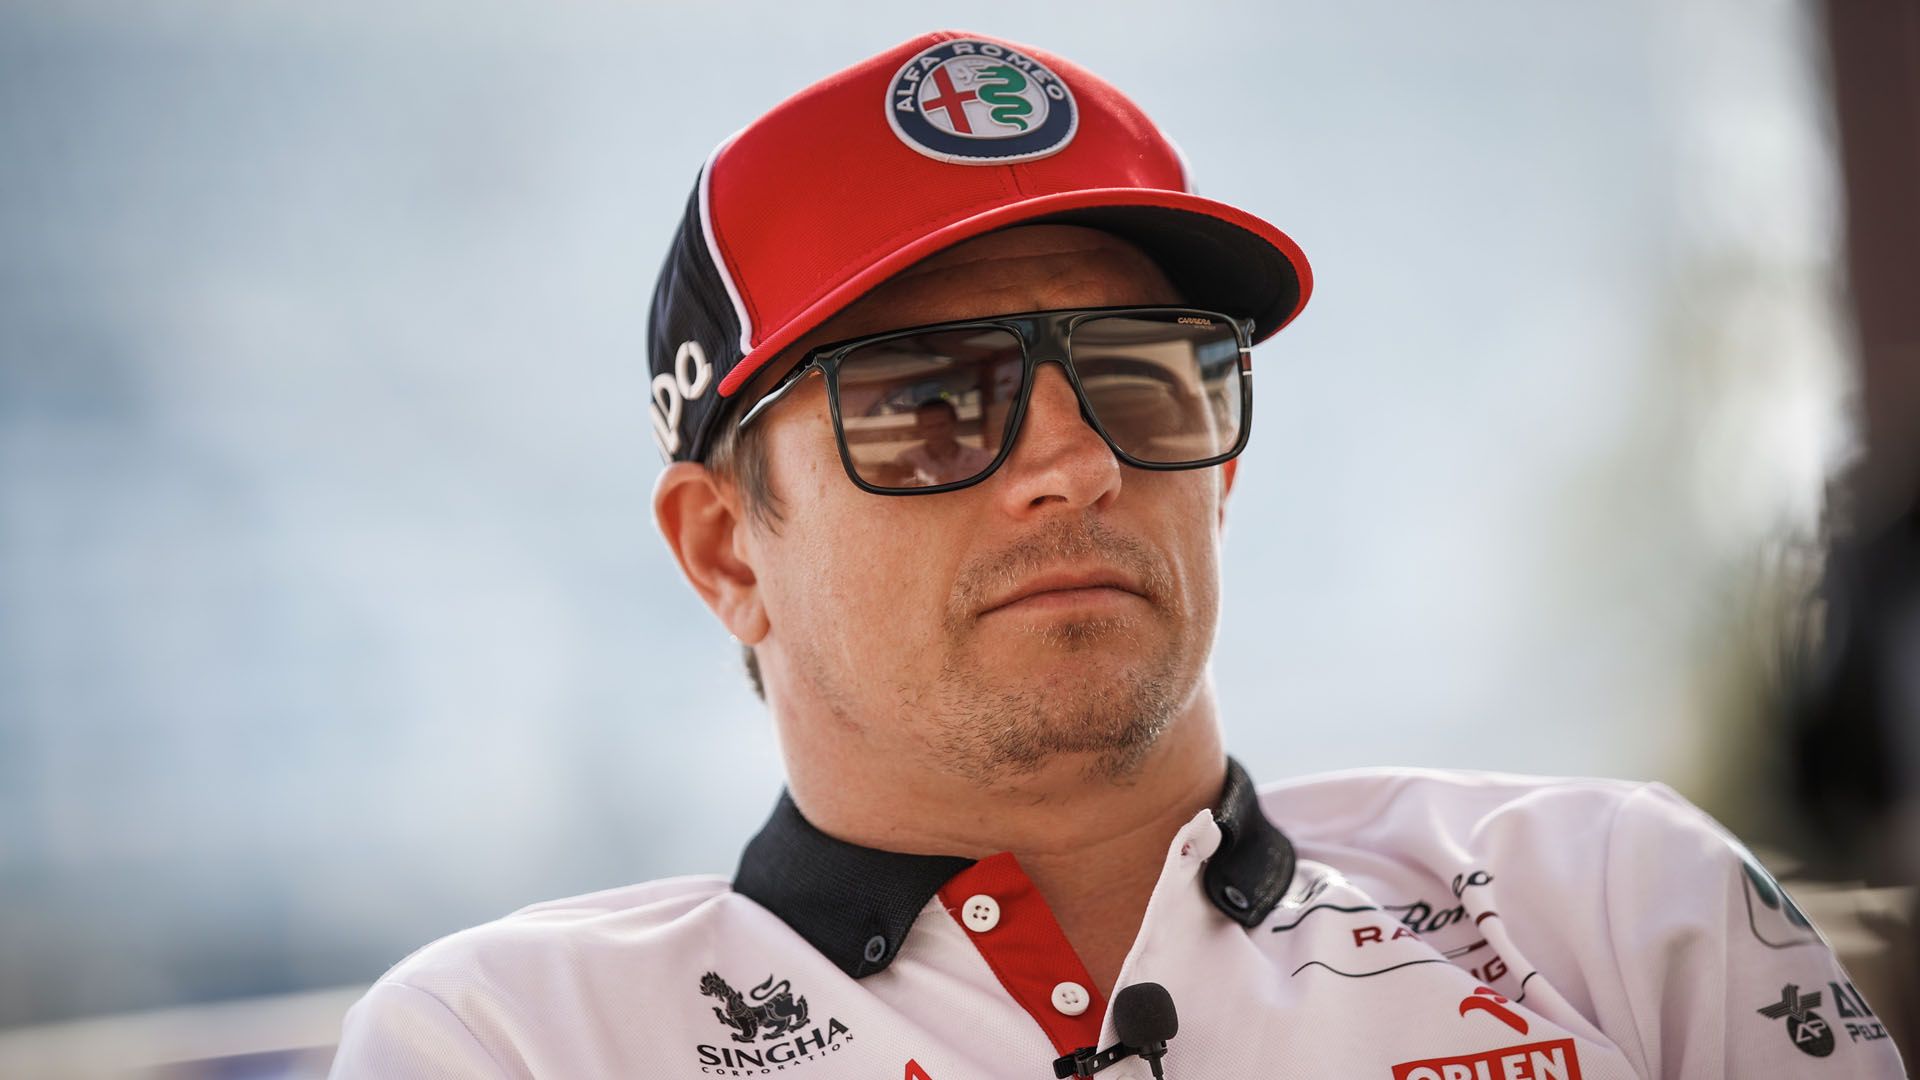 Kimi Raikkonen 'excited for 2021' as he prepares for 20th anniversary of first GP. Formula 1®